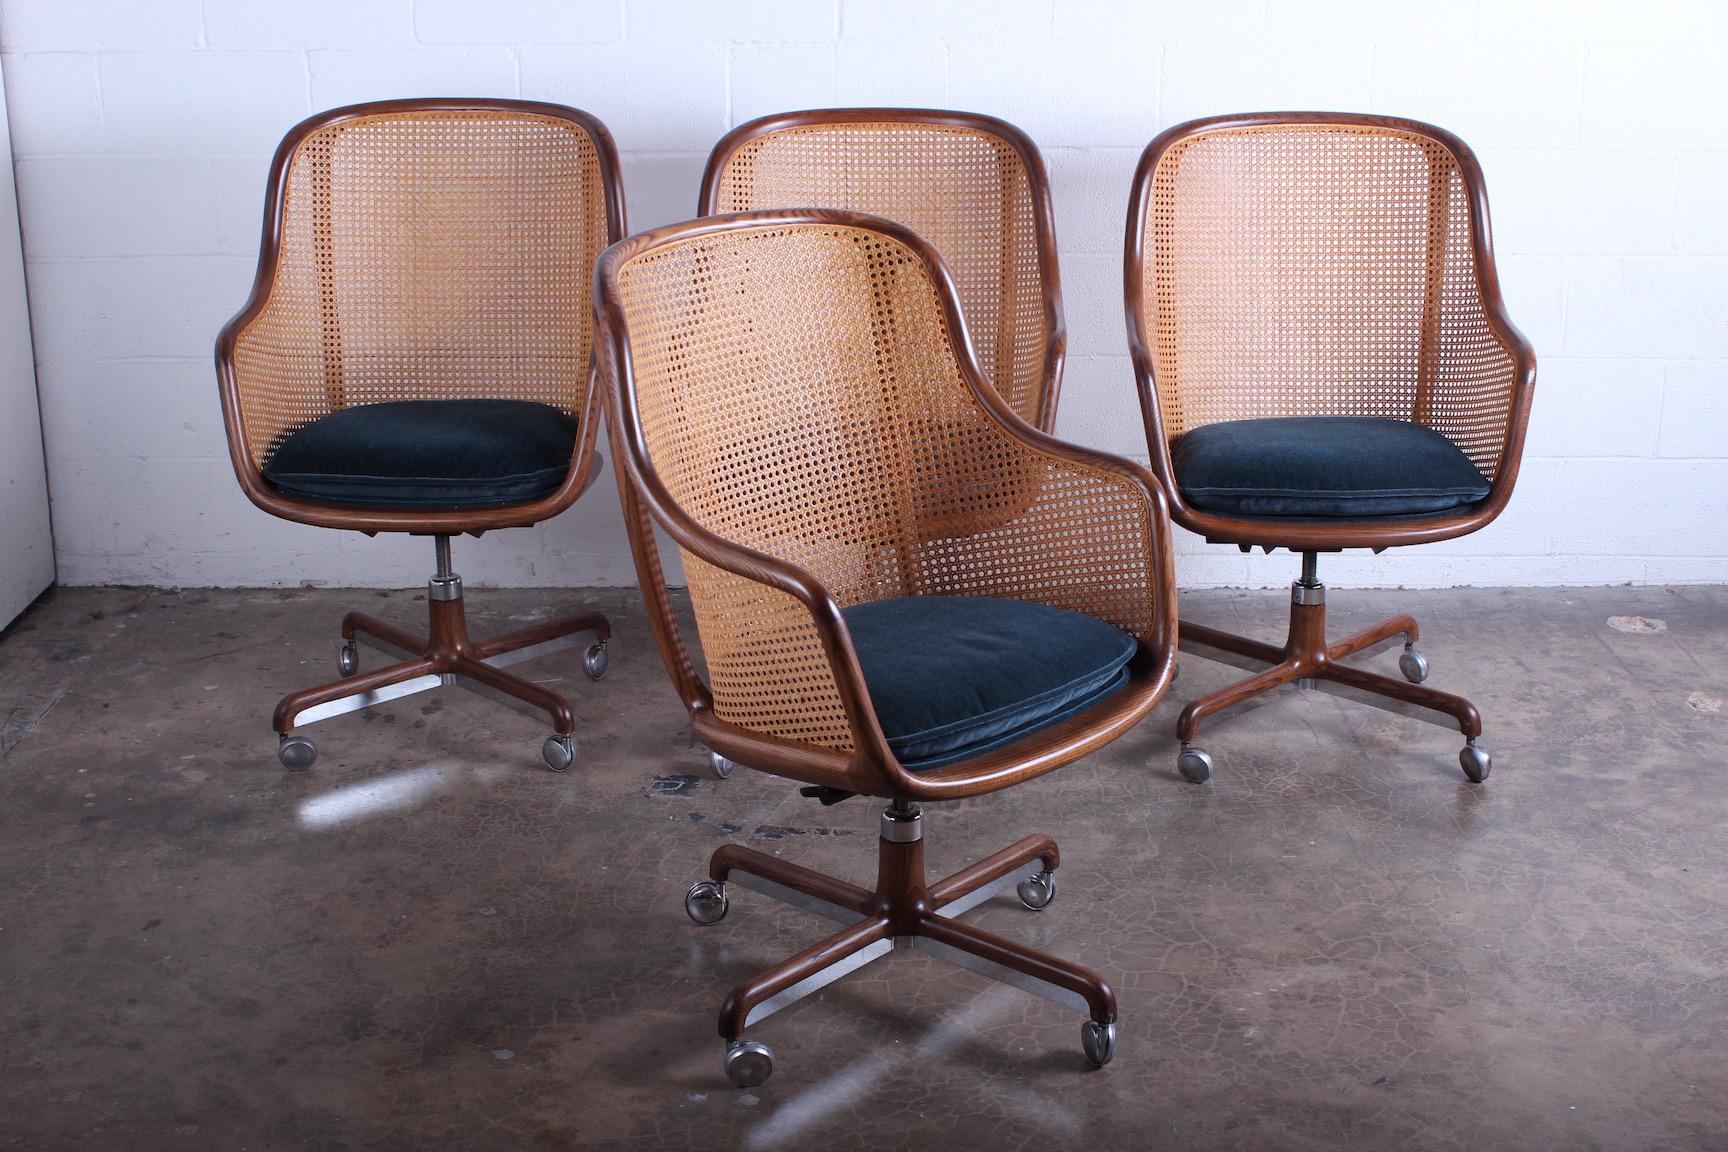 A fully caned swivel/tilt desk chair with ash frame and mohair seat. Designed by Ward Bennett for Brickel.